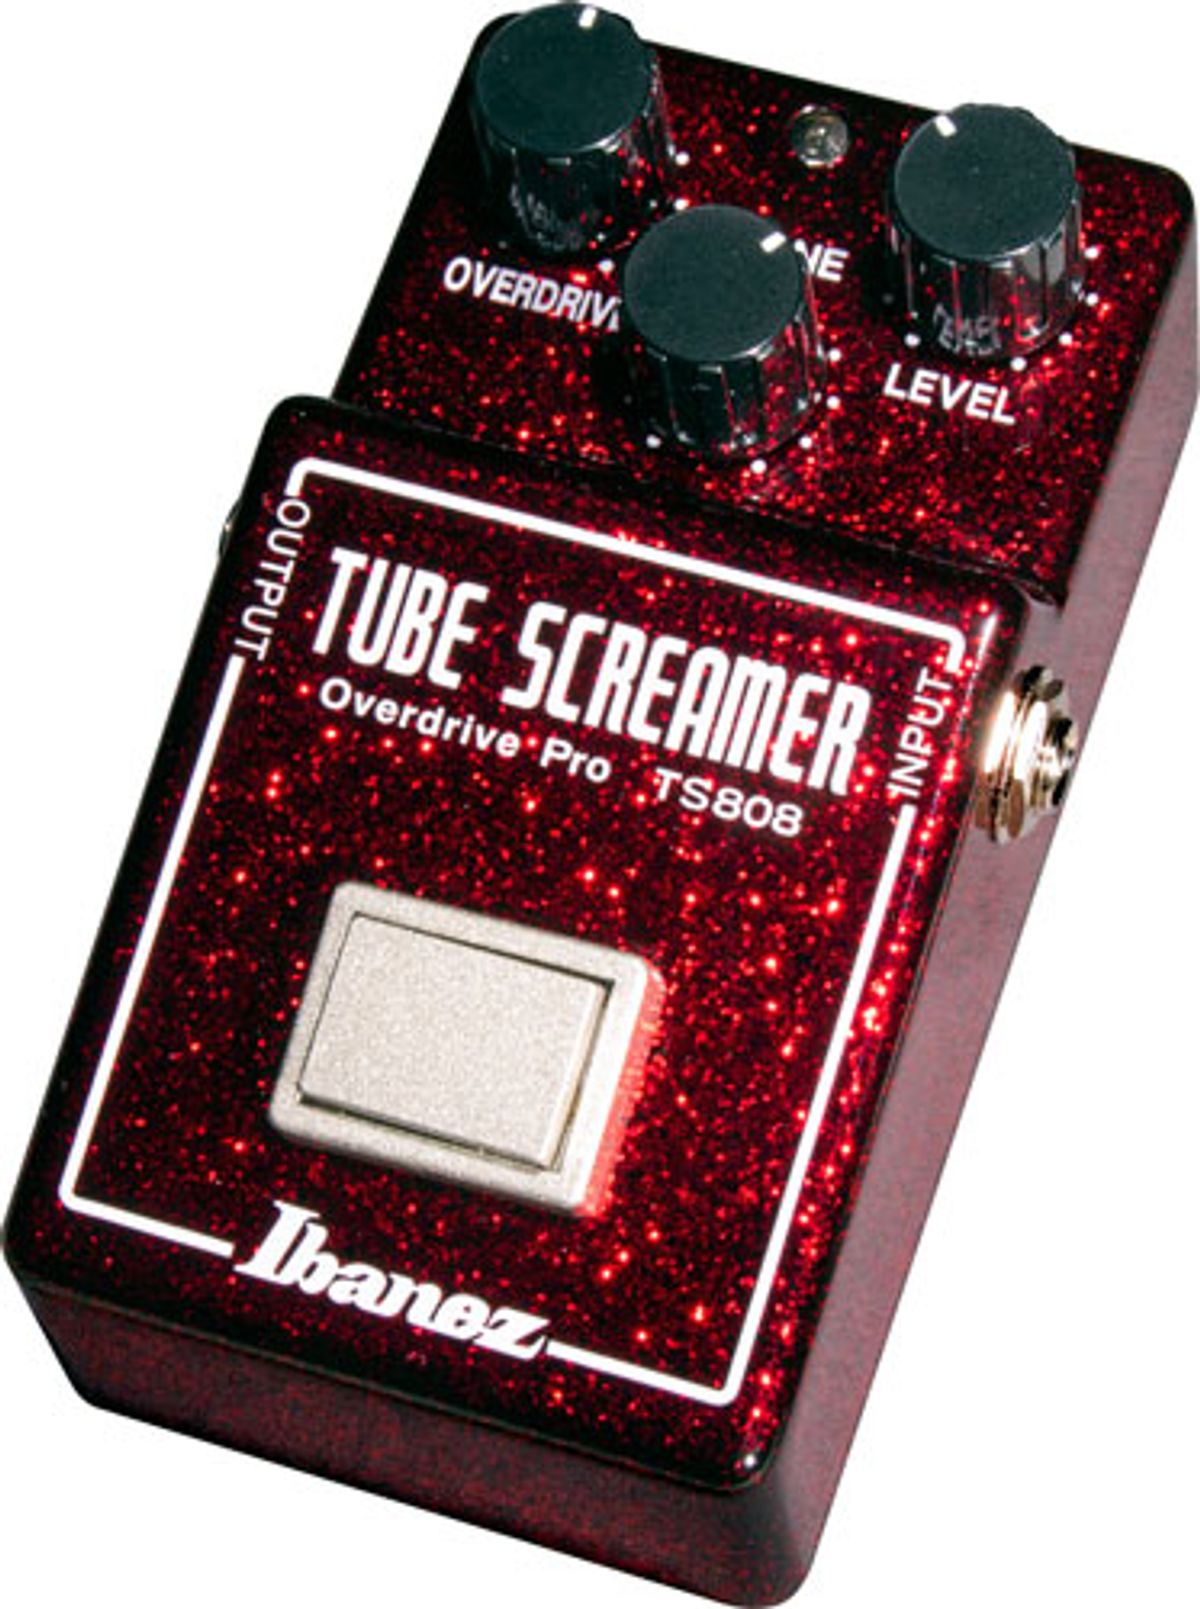 Ibanez Releases the 40th Anniversary Tube Screamer and Collaboration With Vemuram